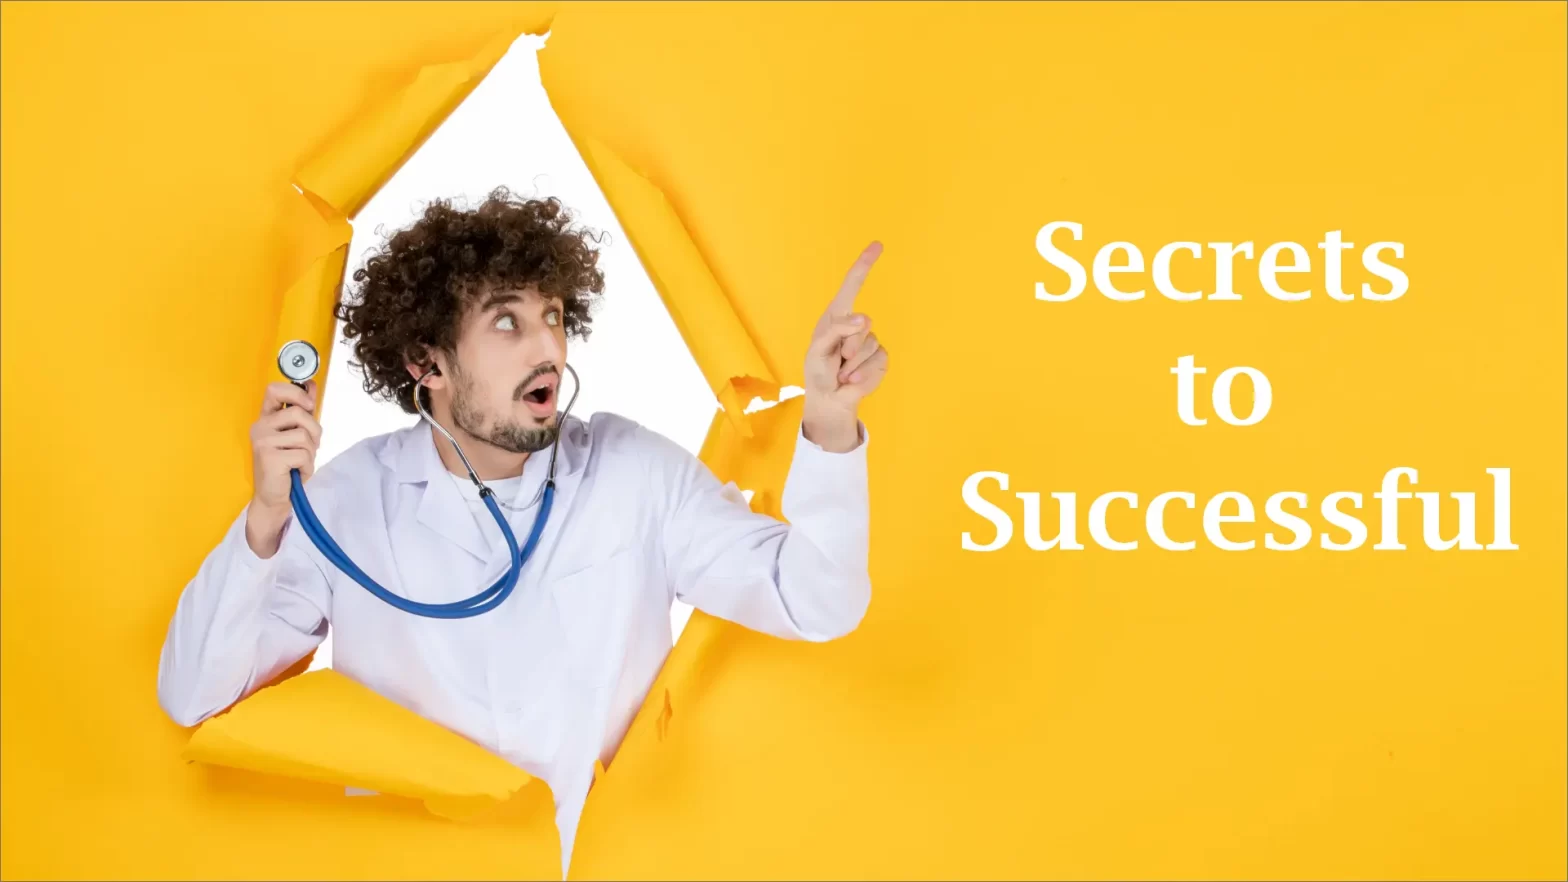 Secrets to Successful in medical marketing